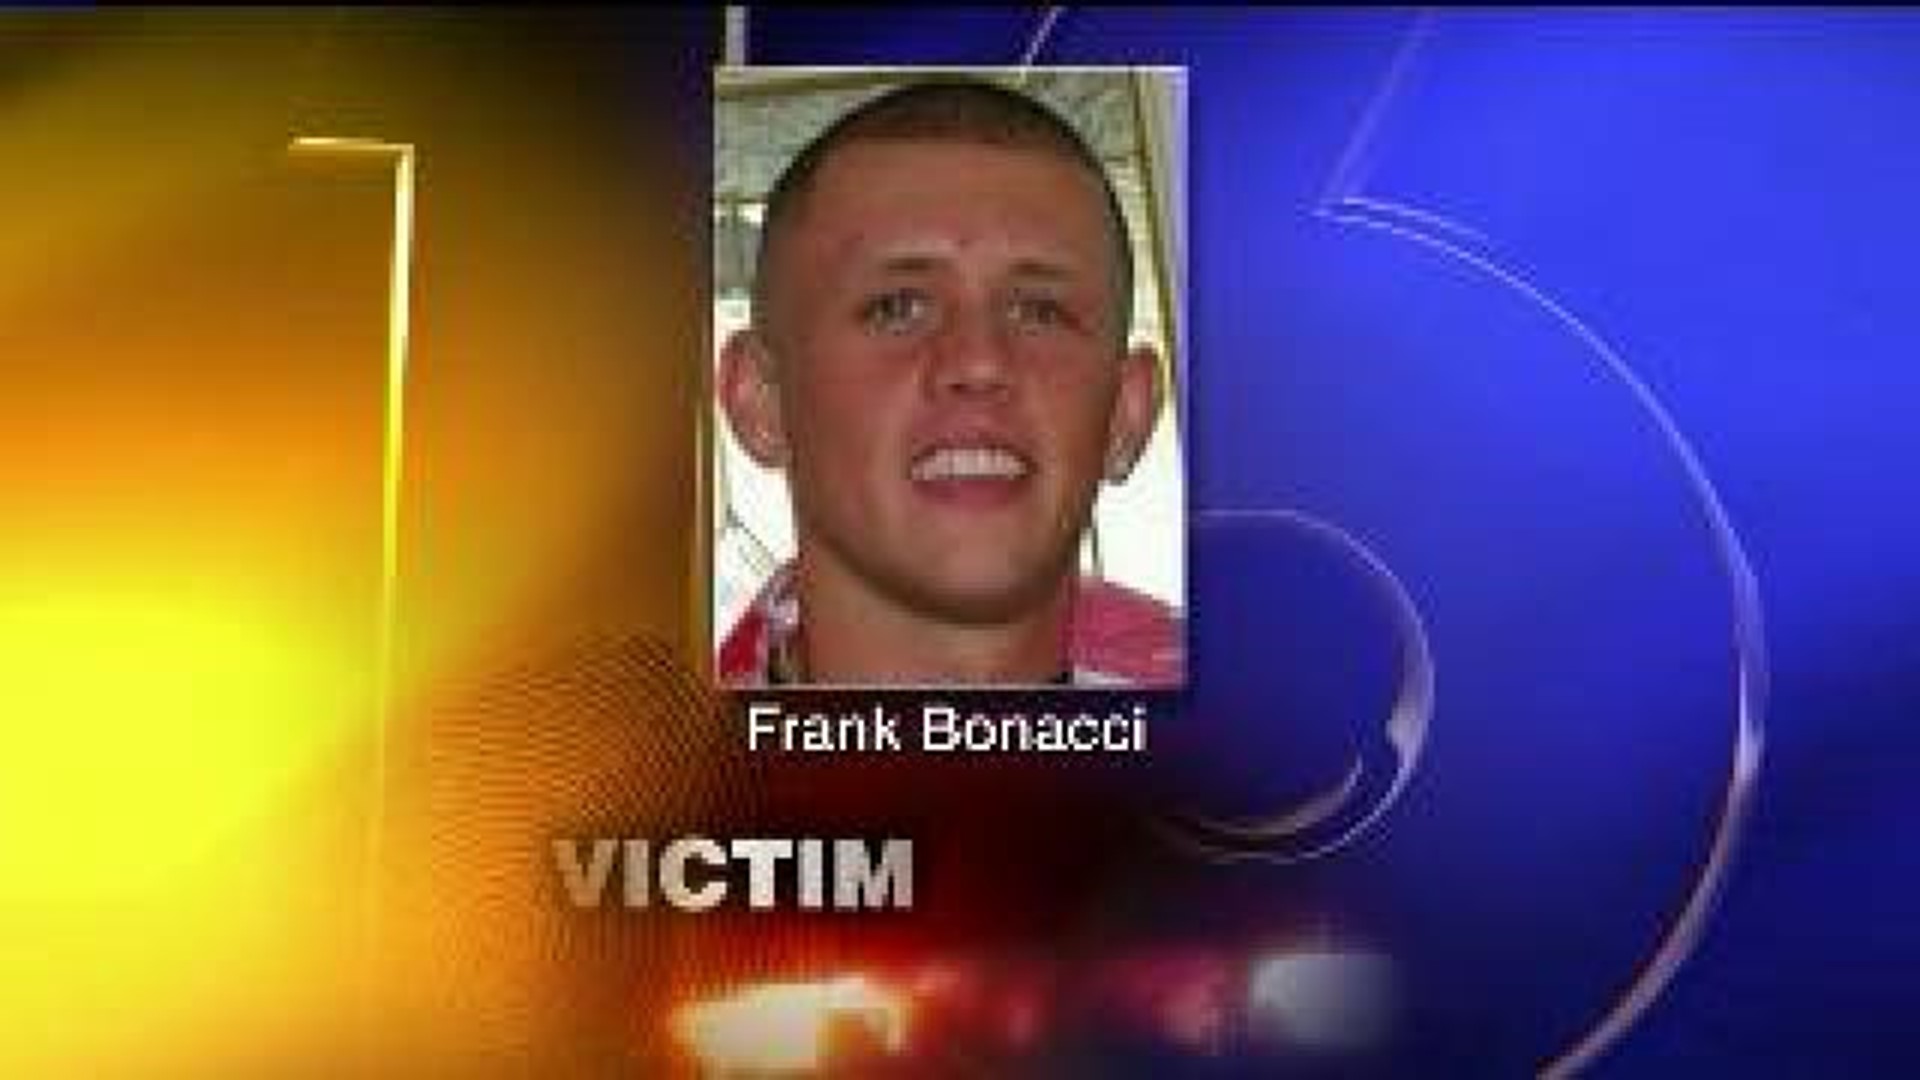 UPDATE: Jason Dominick On Trial For Murder